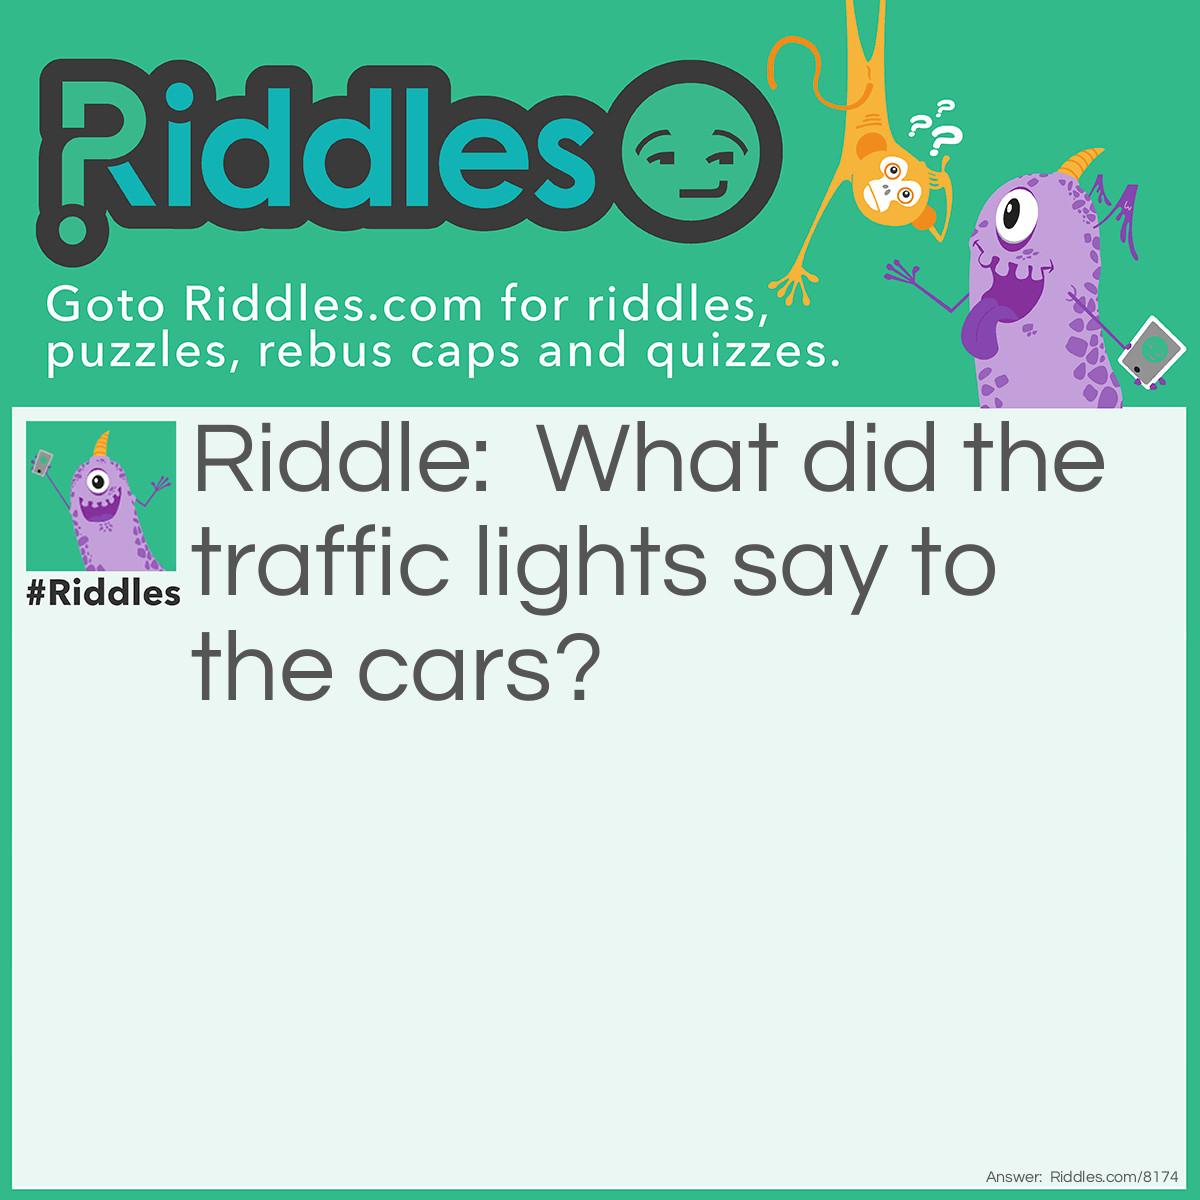 Riddle: What did the traffic lights say to the cars? Answer: “Don’t look I’m changing!”